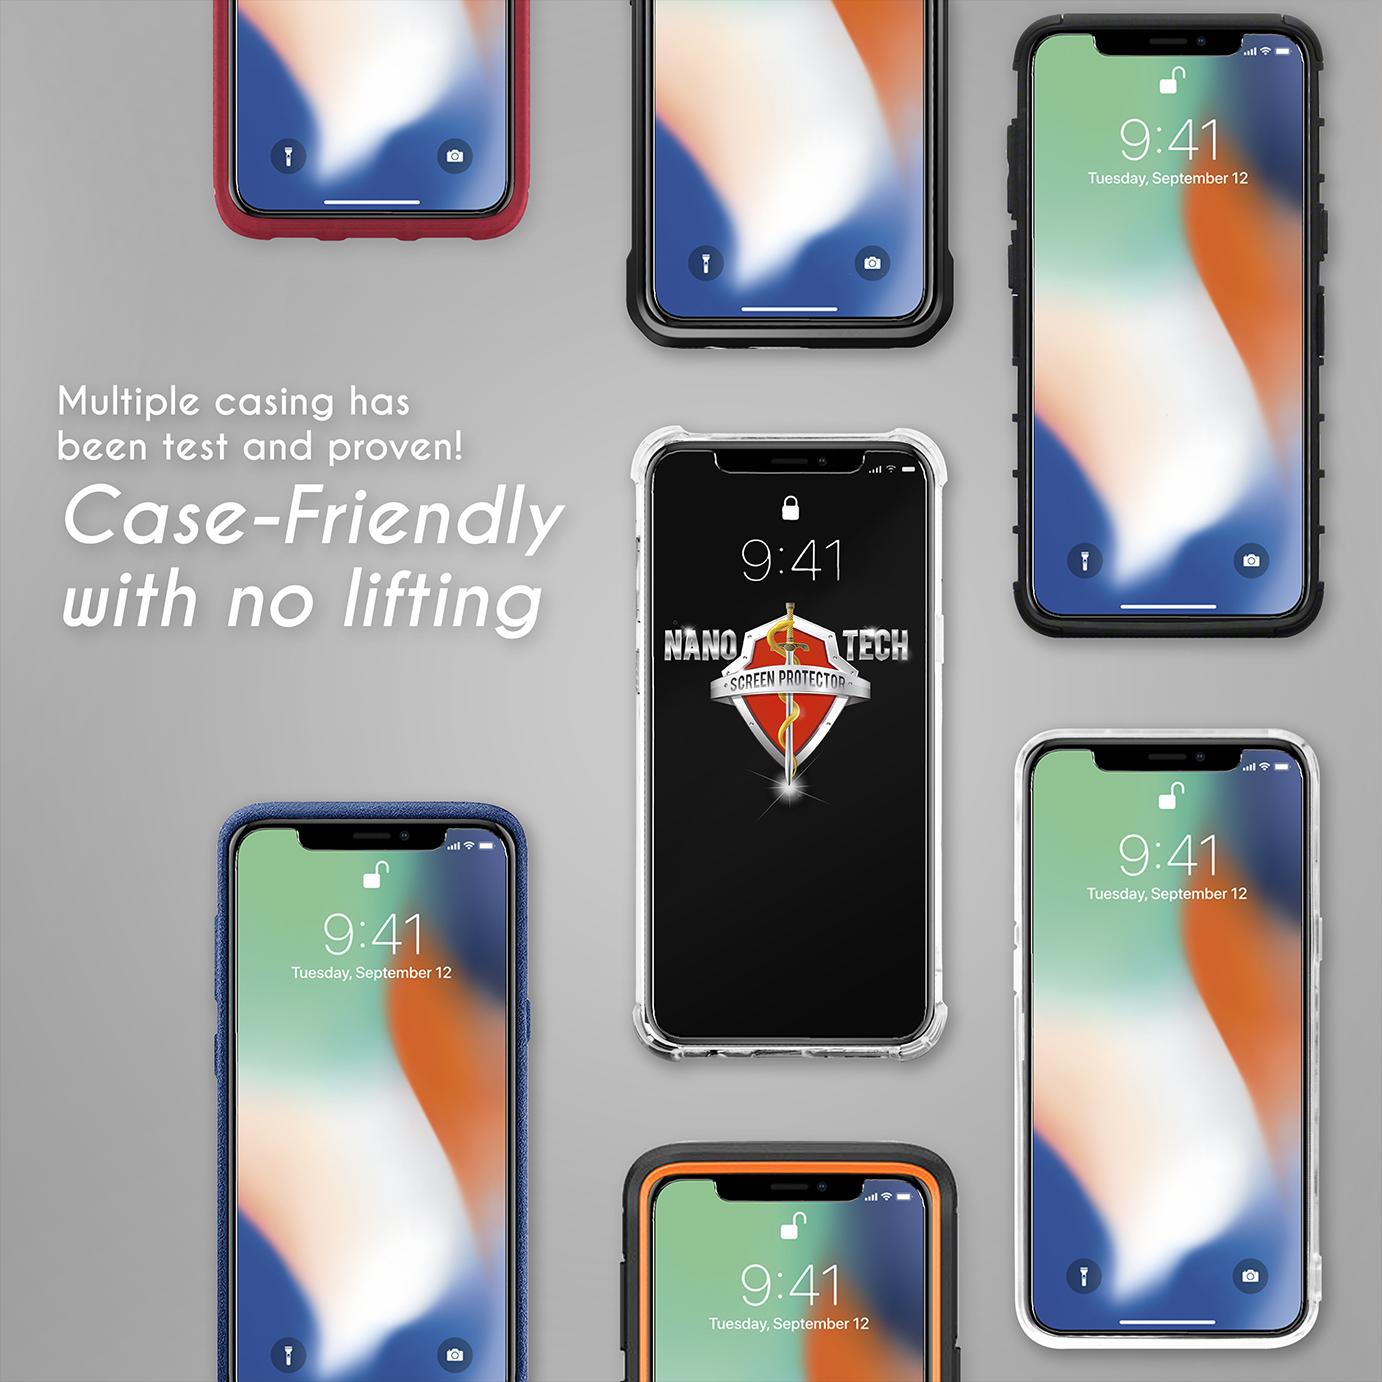 [Buy1Free1]Nanotech iPhone XS Max Tempered Glass Screen Protector [0.2MM][Non-full Coverage]